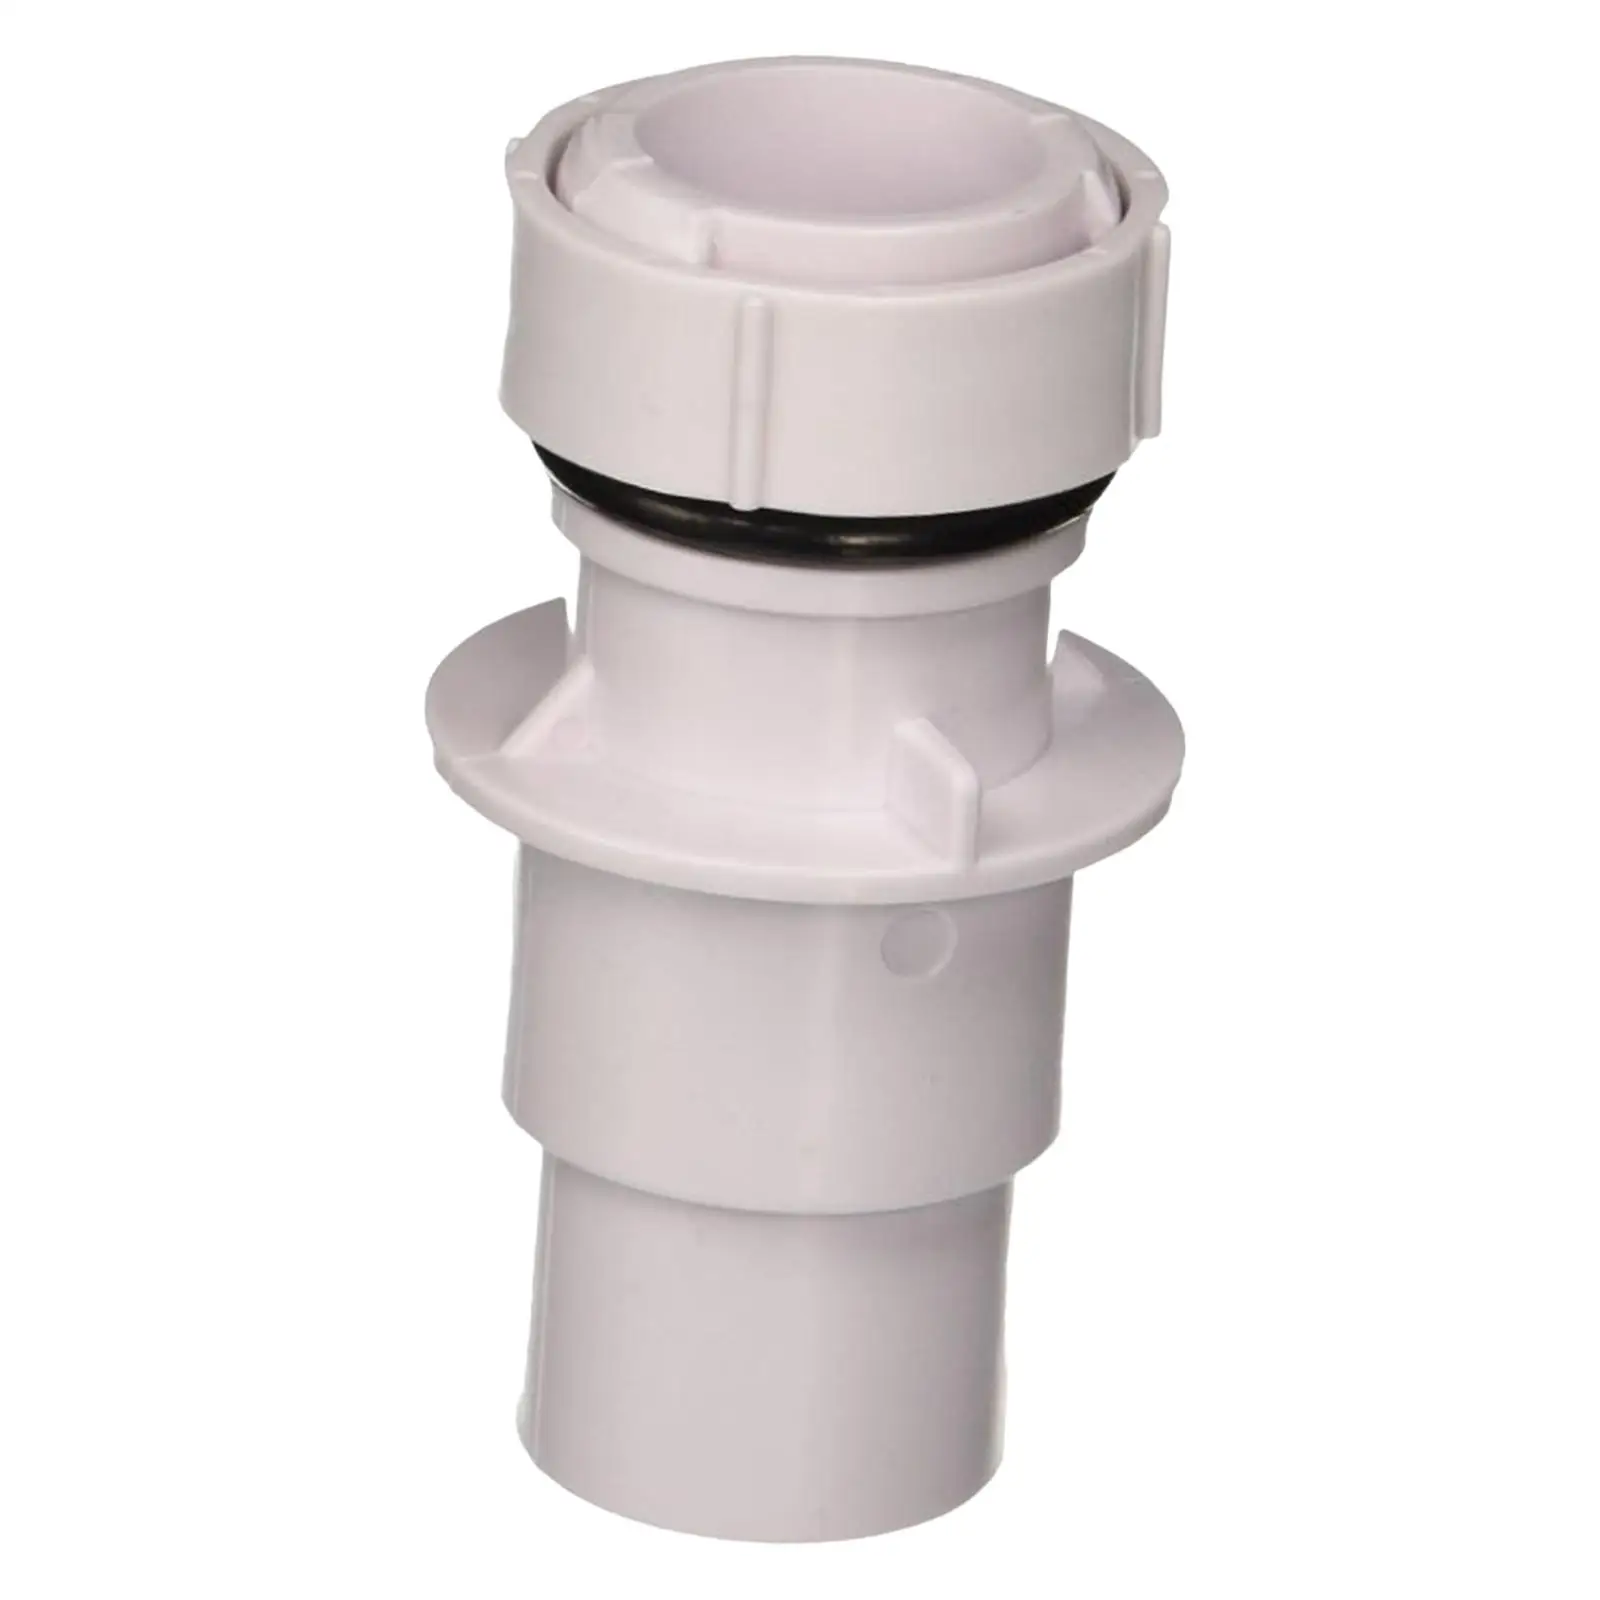 above Ground Pool Hose Coupling Connector Adapter Durable Pool Cleaning Fittings for Filter Skimmer Plumbing Connection Supplies